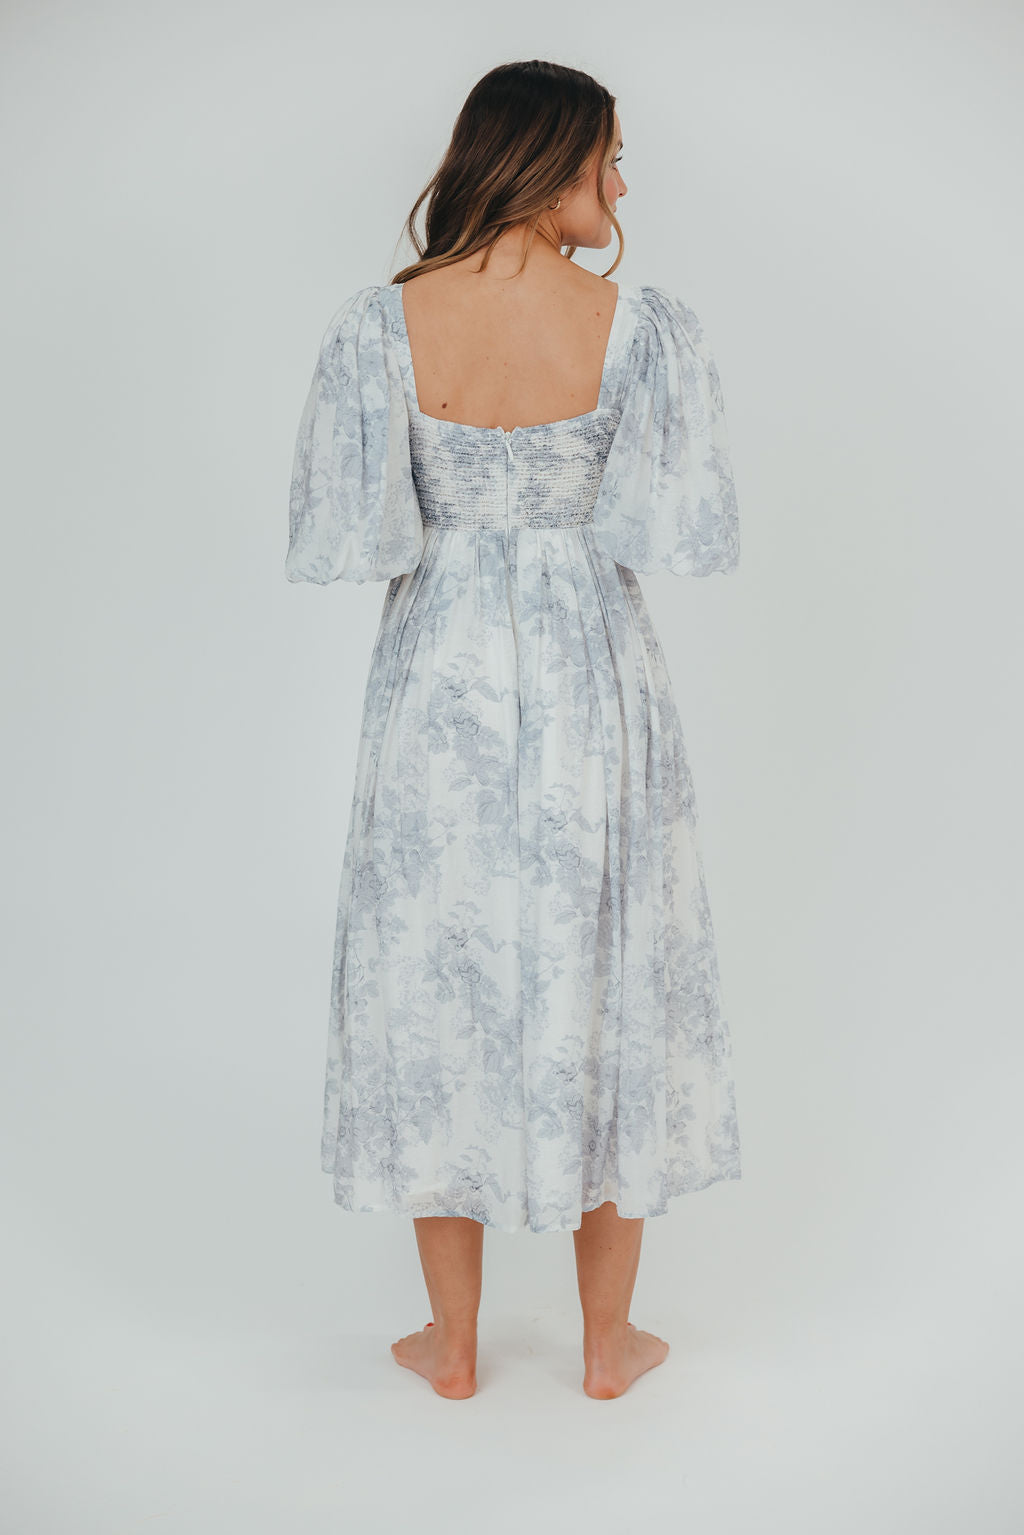 Harlow Maxi Dress in Light Blue Floral - Bump Friendly & Inclusive Sizing (S-3XL)